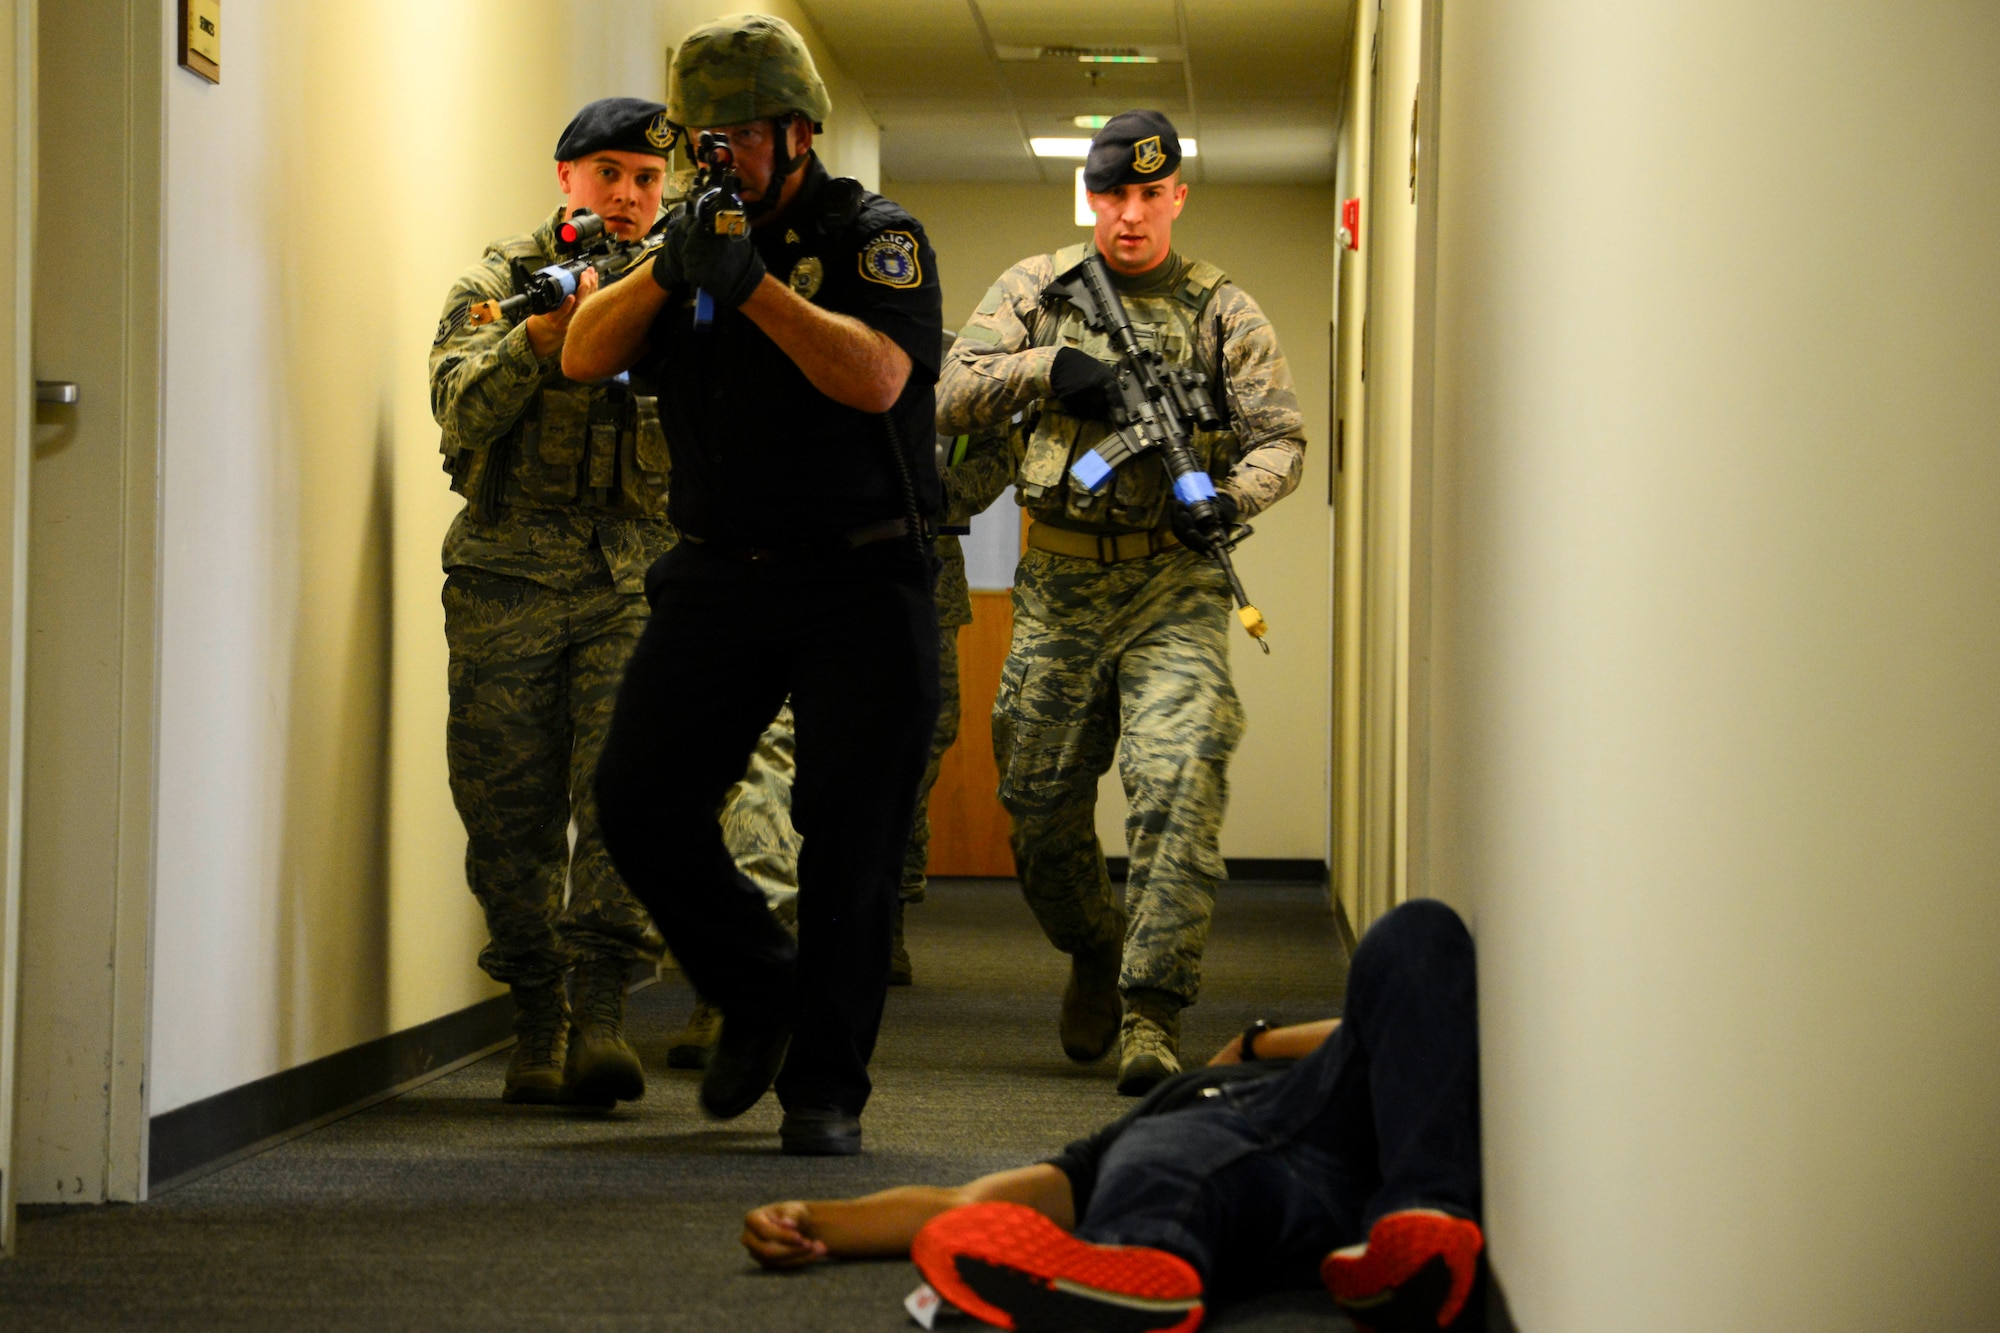 Run, hide, fight – Fairchild conducts active shooter exercise